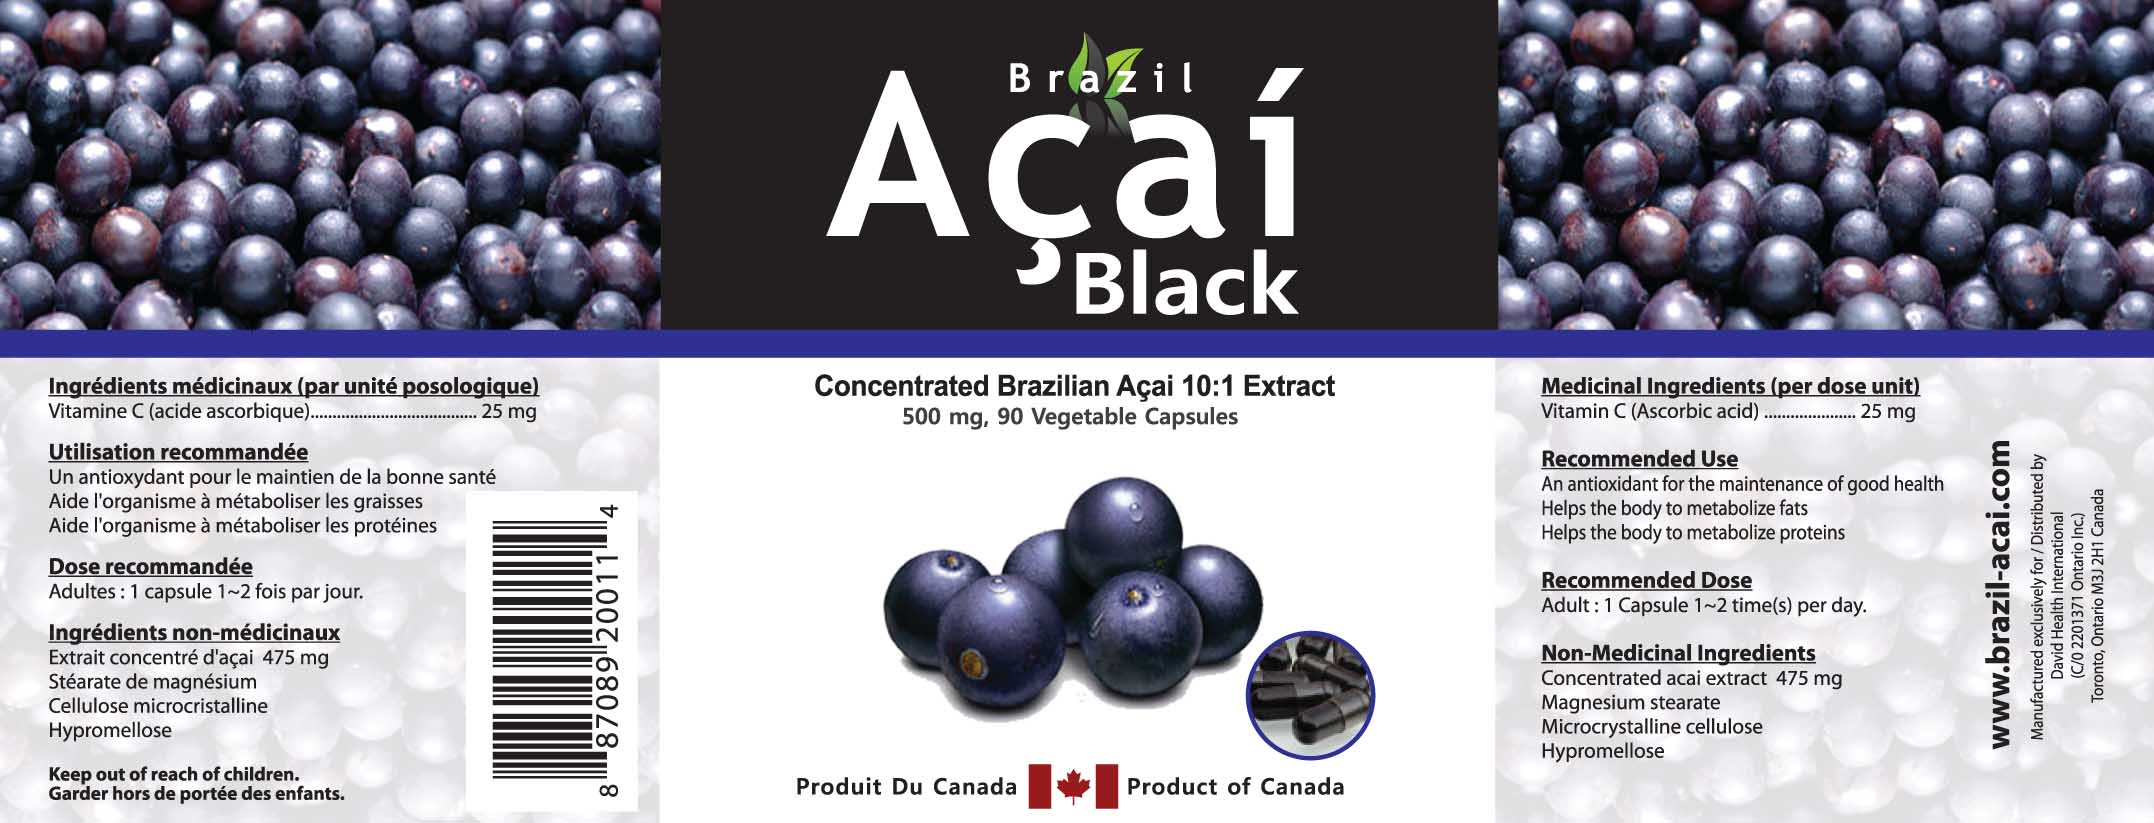 BRAZIL ACAI BLACK 10:1 CONCENTRATED